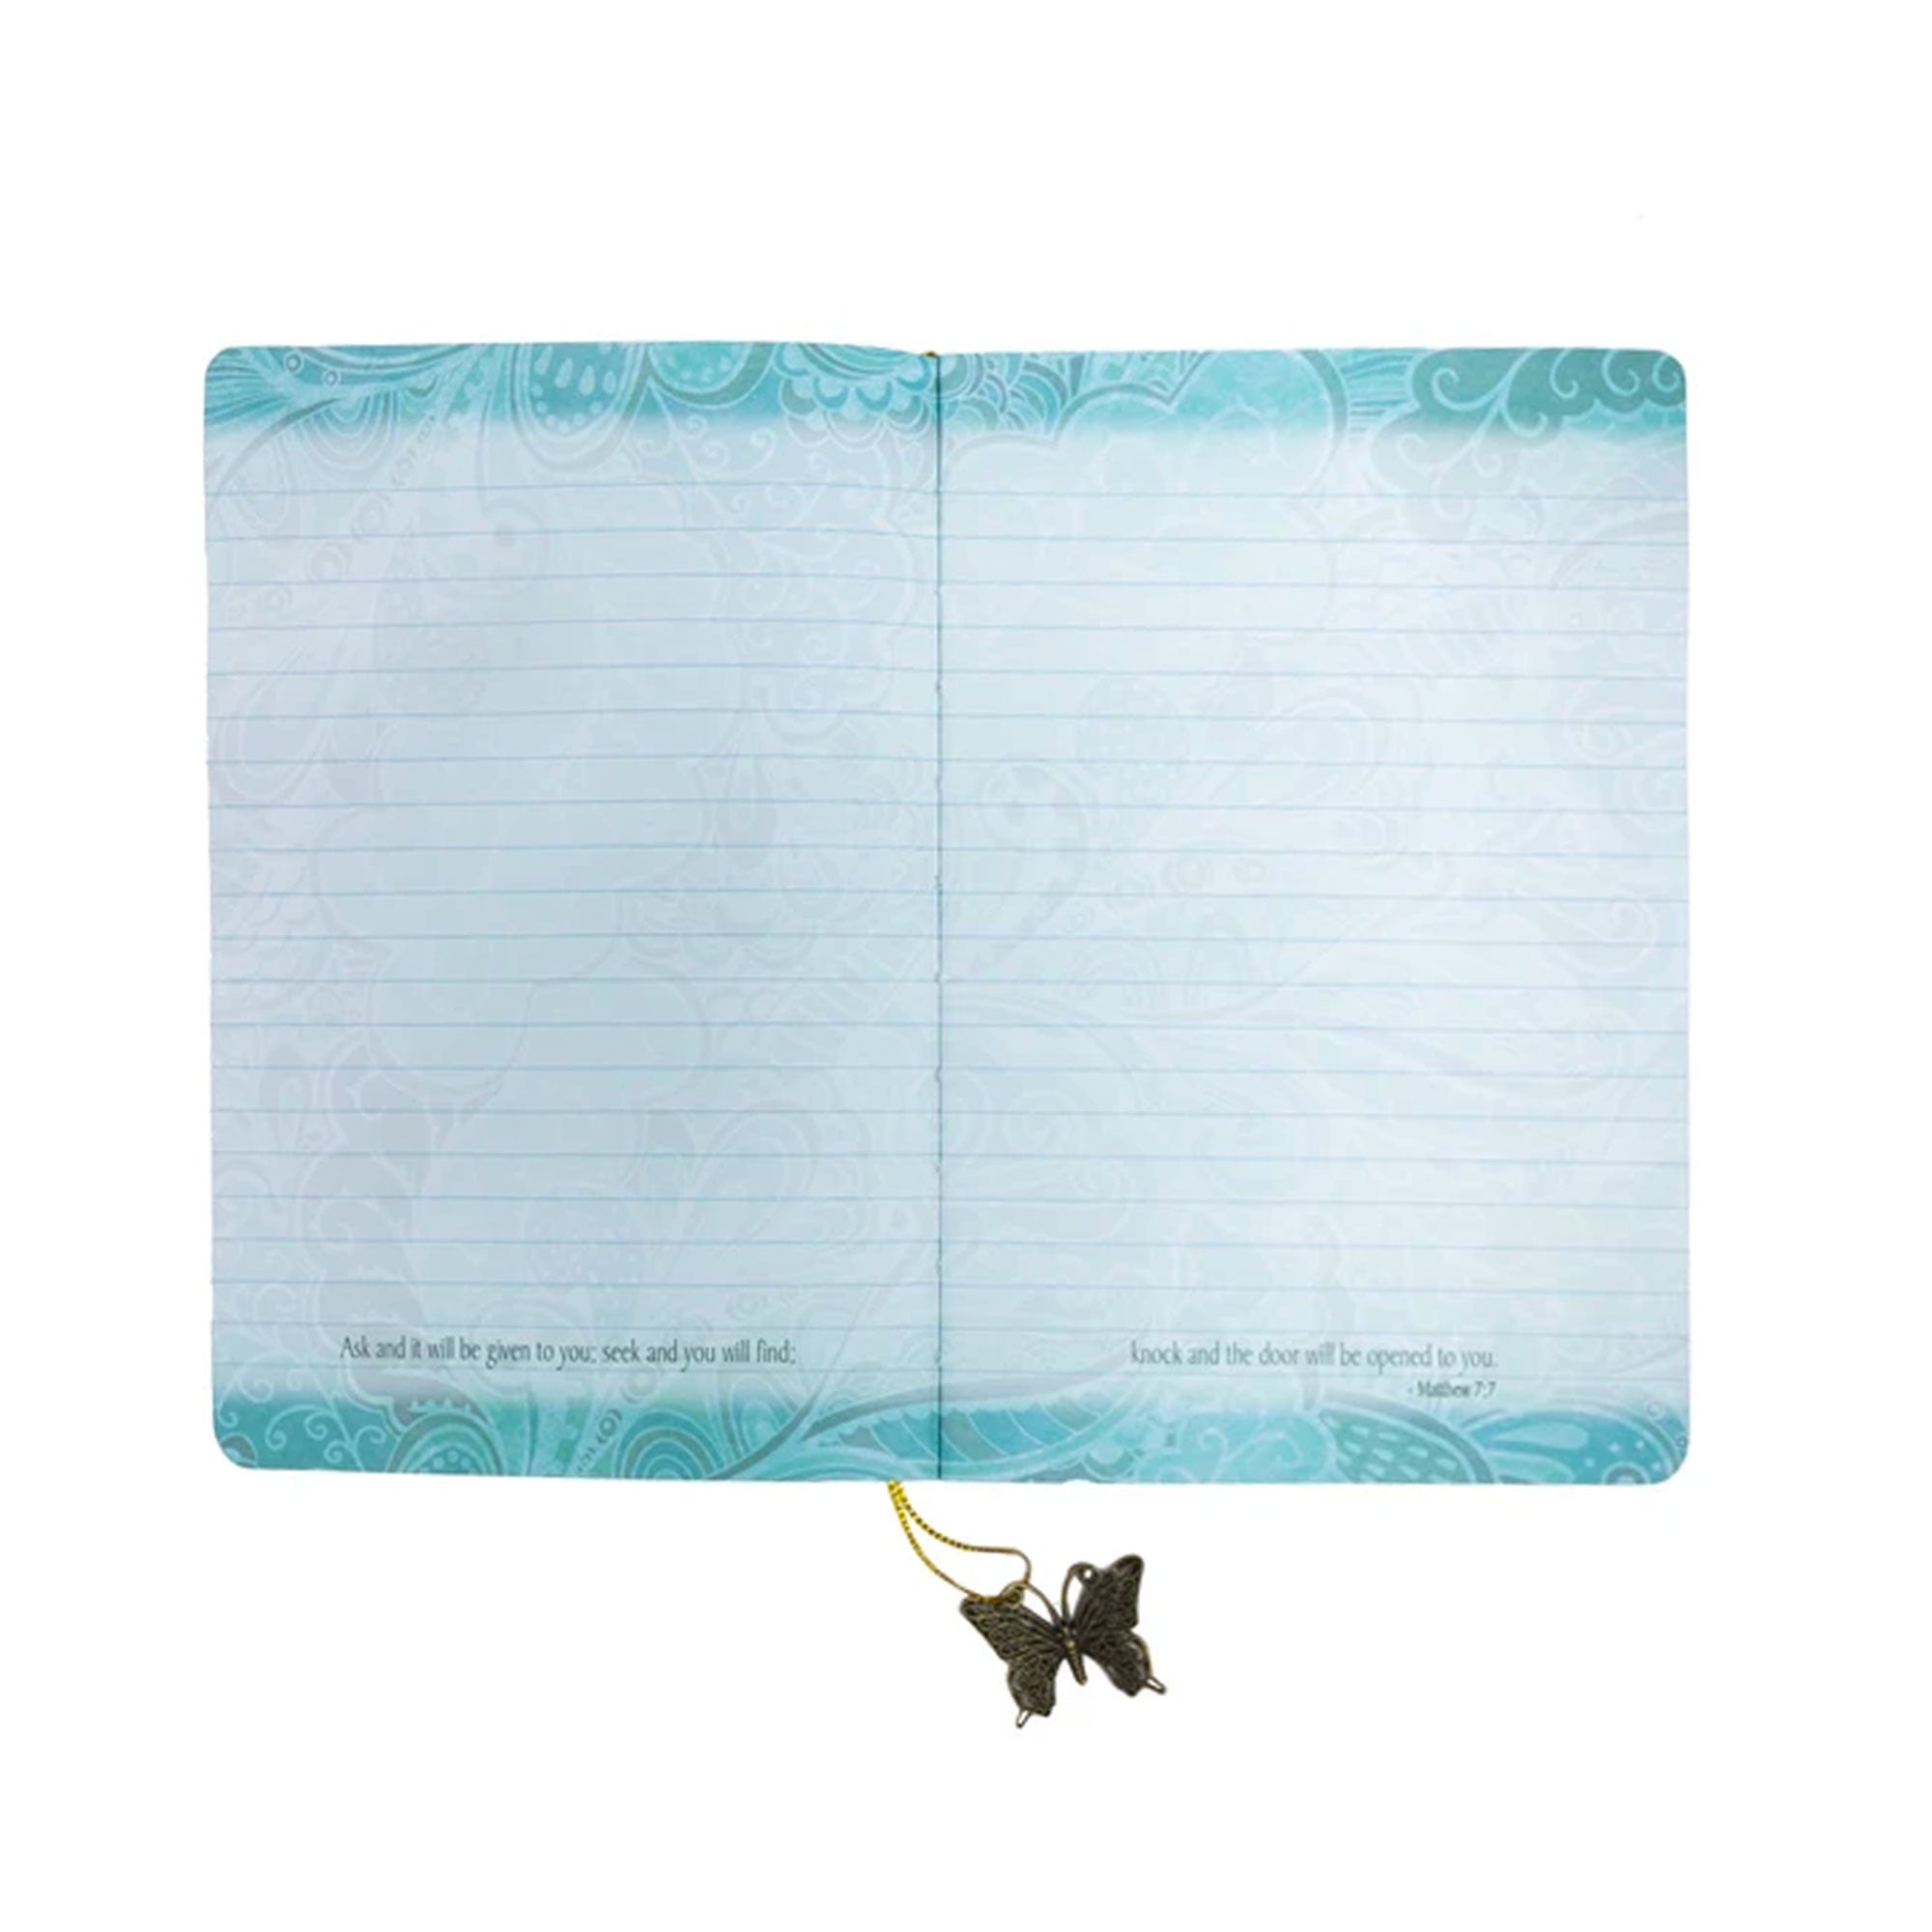 Faux Leather Journal : Teal Serenity Prayer, Butterfly Charm